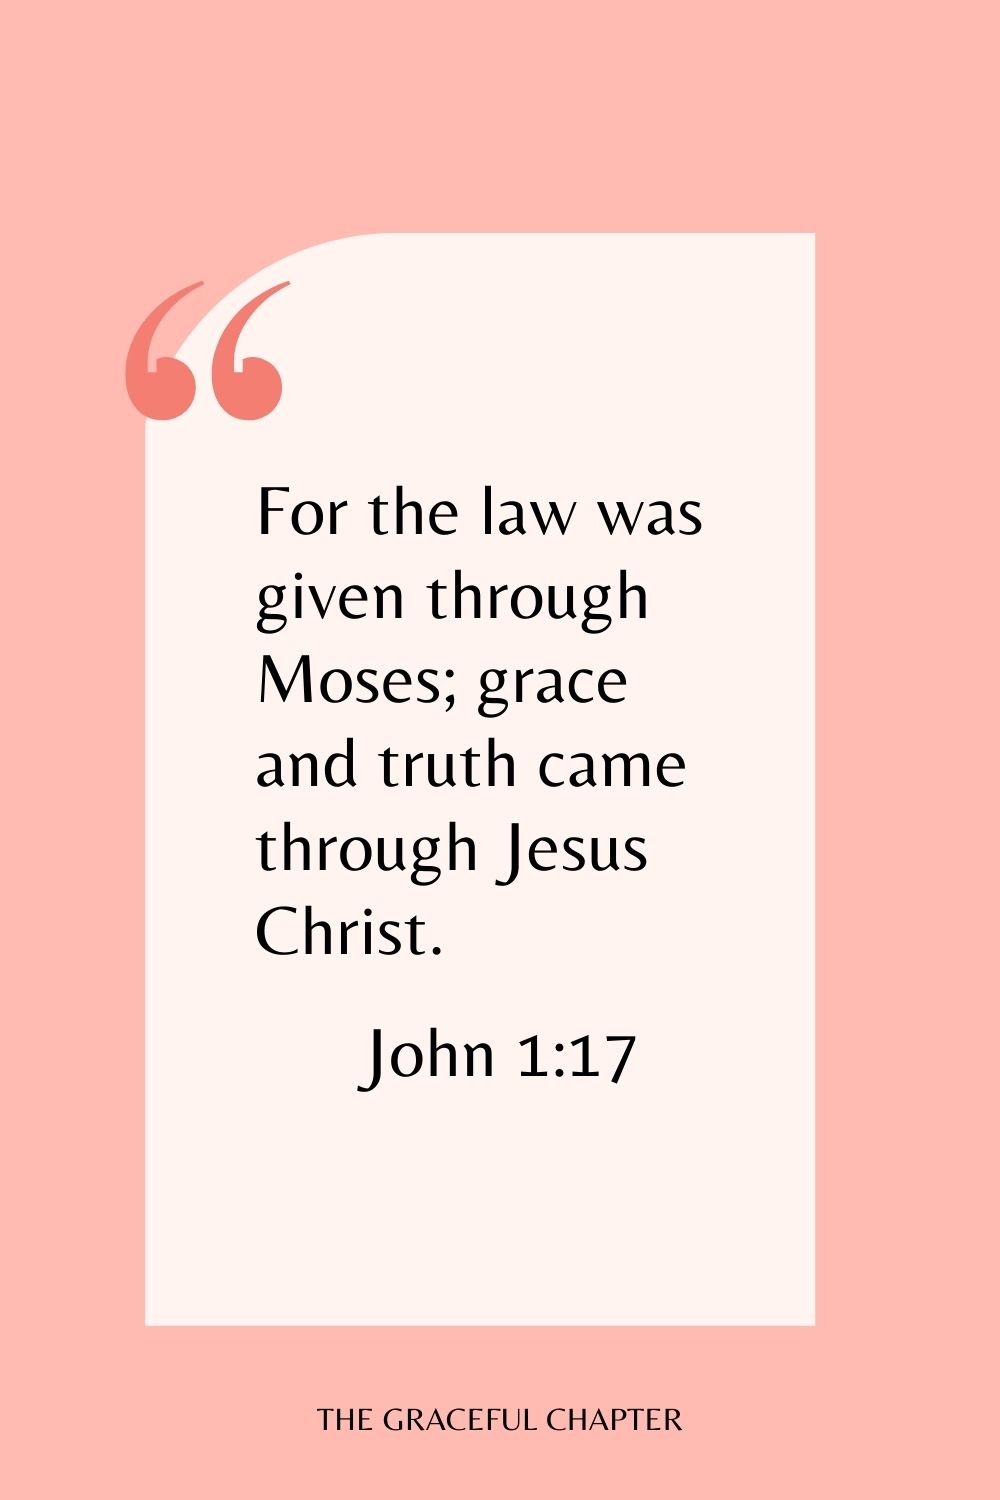 For the law was given through Moses; grace and truth came through Jesus Christ. John 1:17